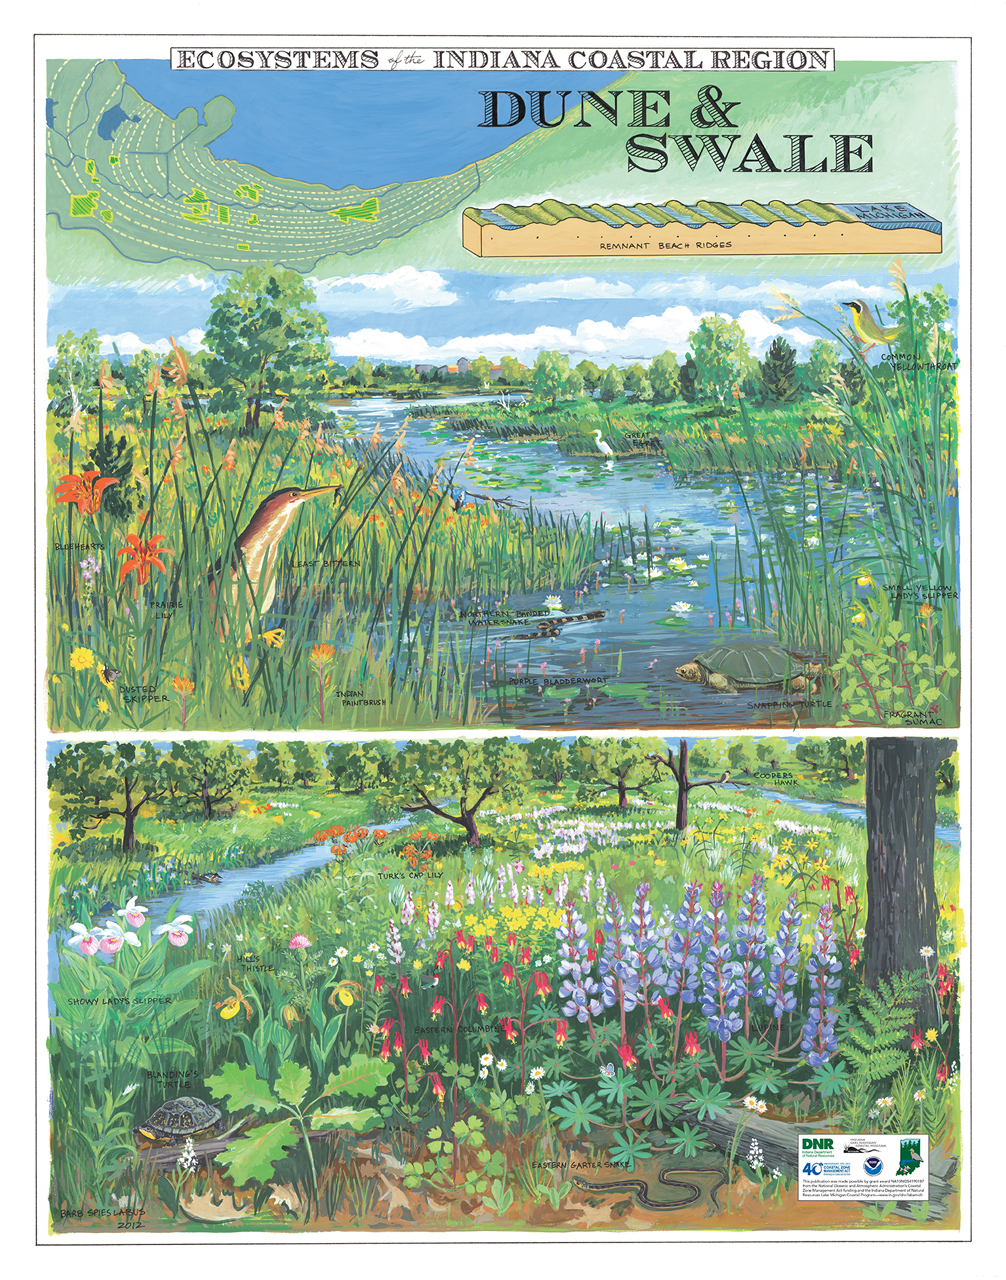 Image of two panels shows colorful wildflowers, grasses, waterways, and wildlife creatures, plus the words “Dune & Swale” and “Ecosystems of the Indiana Coastal Region.”